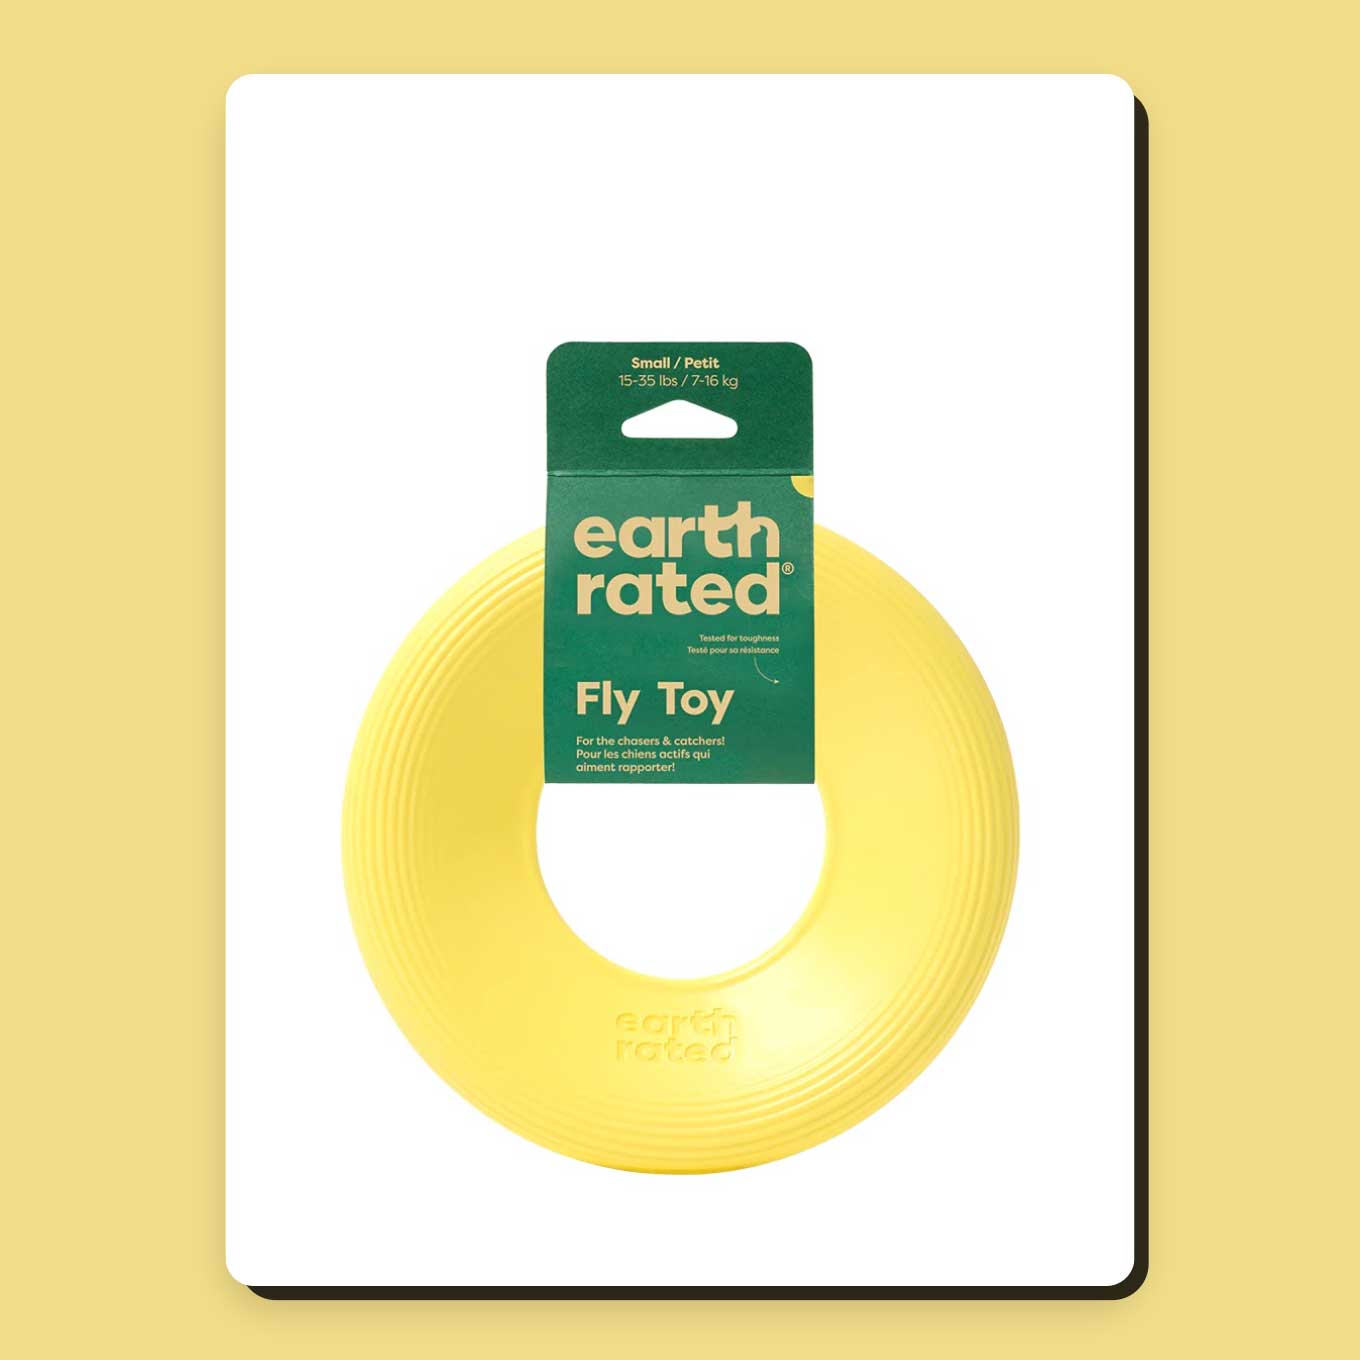 A yellow disc toy from Earth Rated